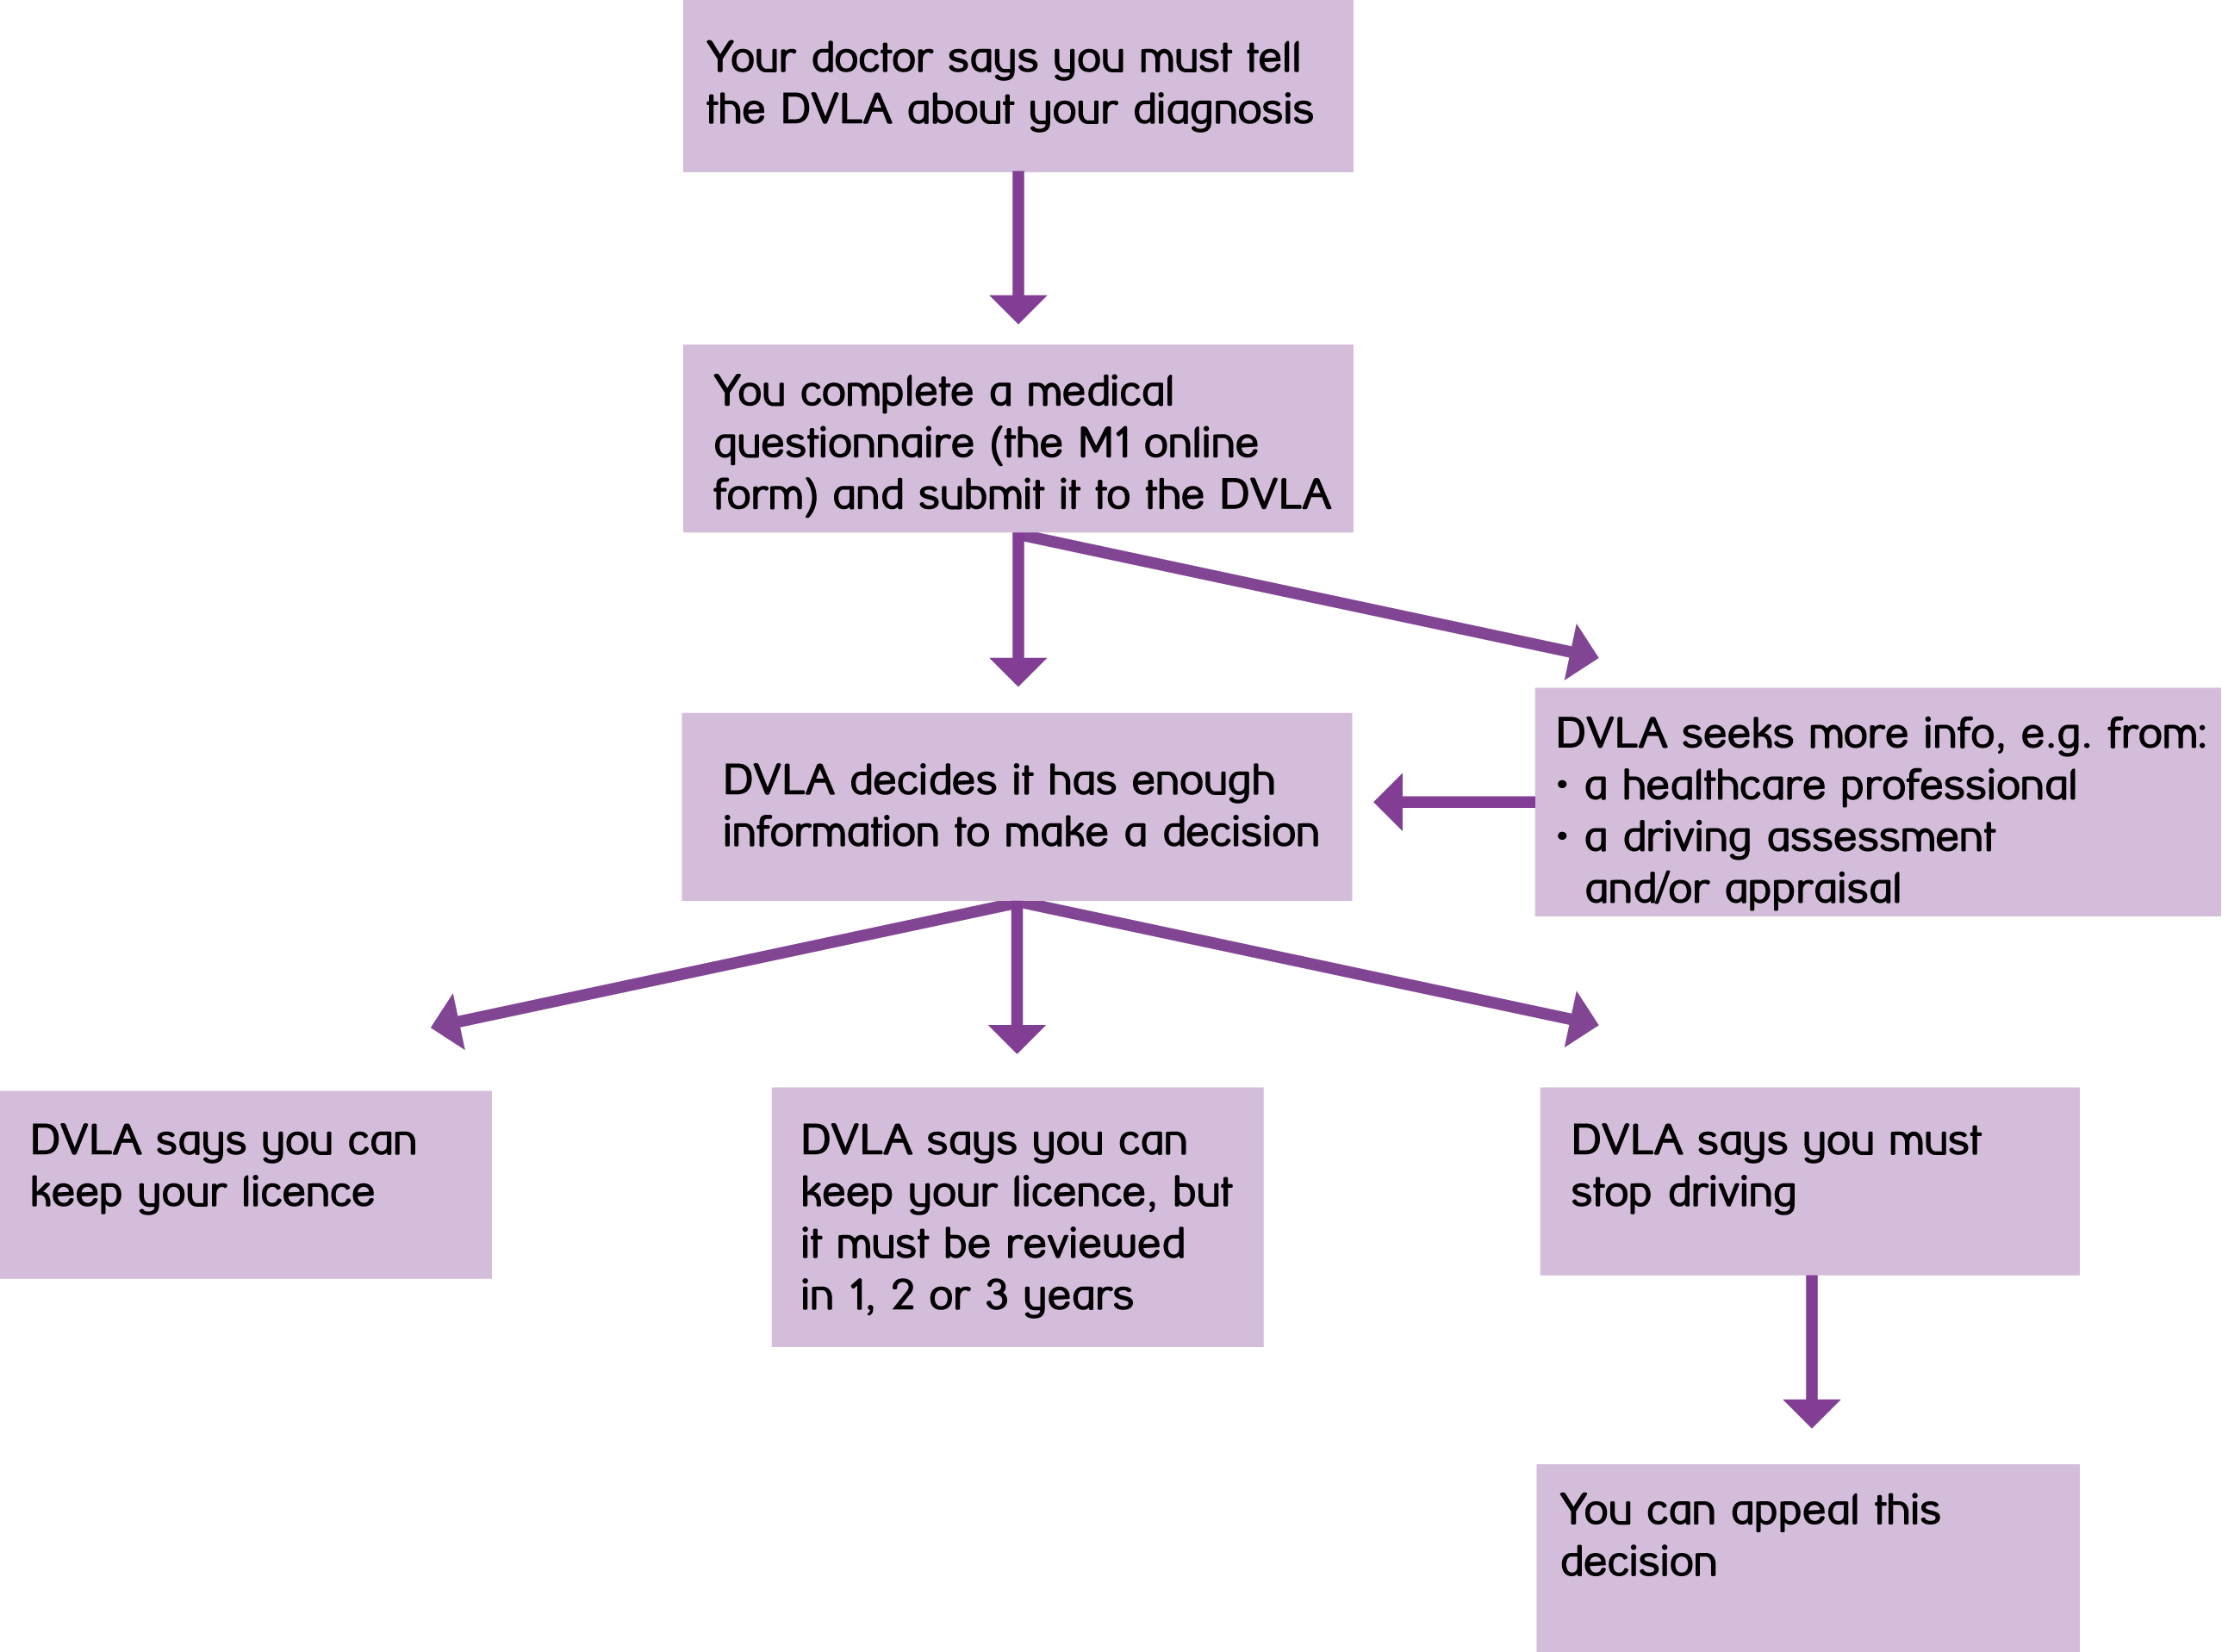 Flowchart showing what the DVLA does with the information you give them, as described under "What will the DVLA do with the information I give them?"